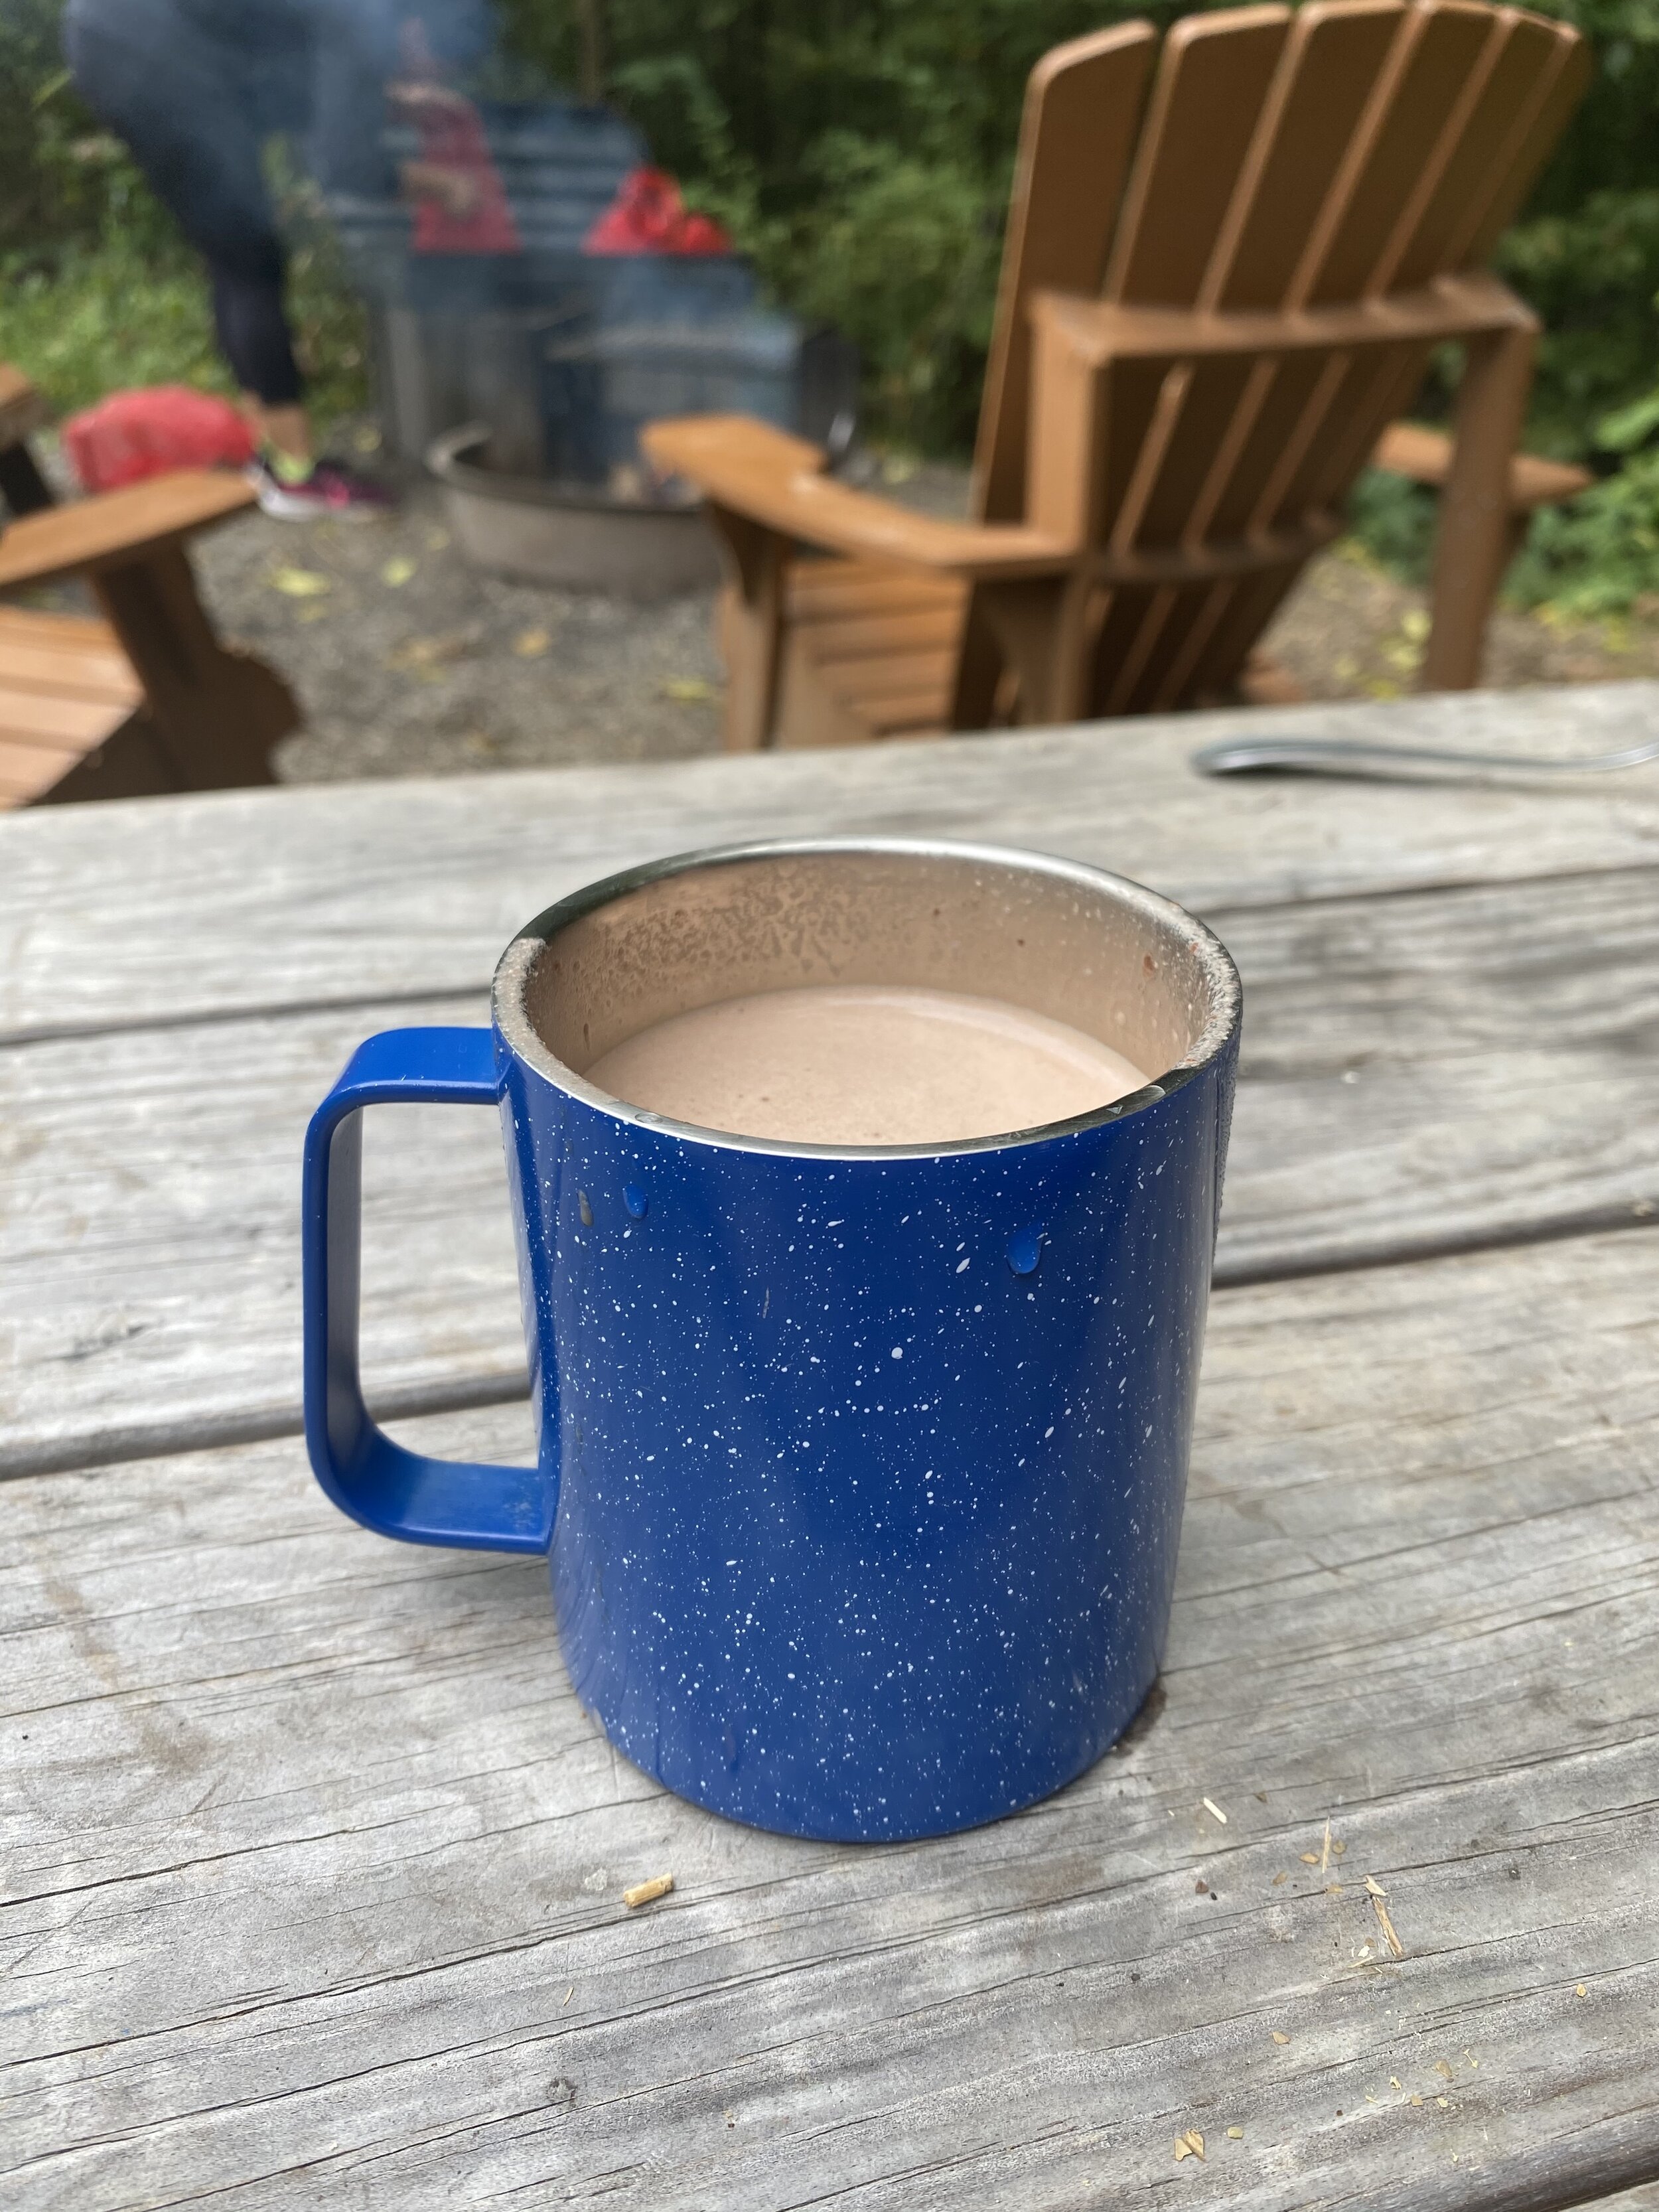 Cup of hot chocolate on a picnic table in the woods